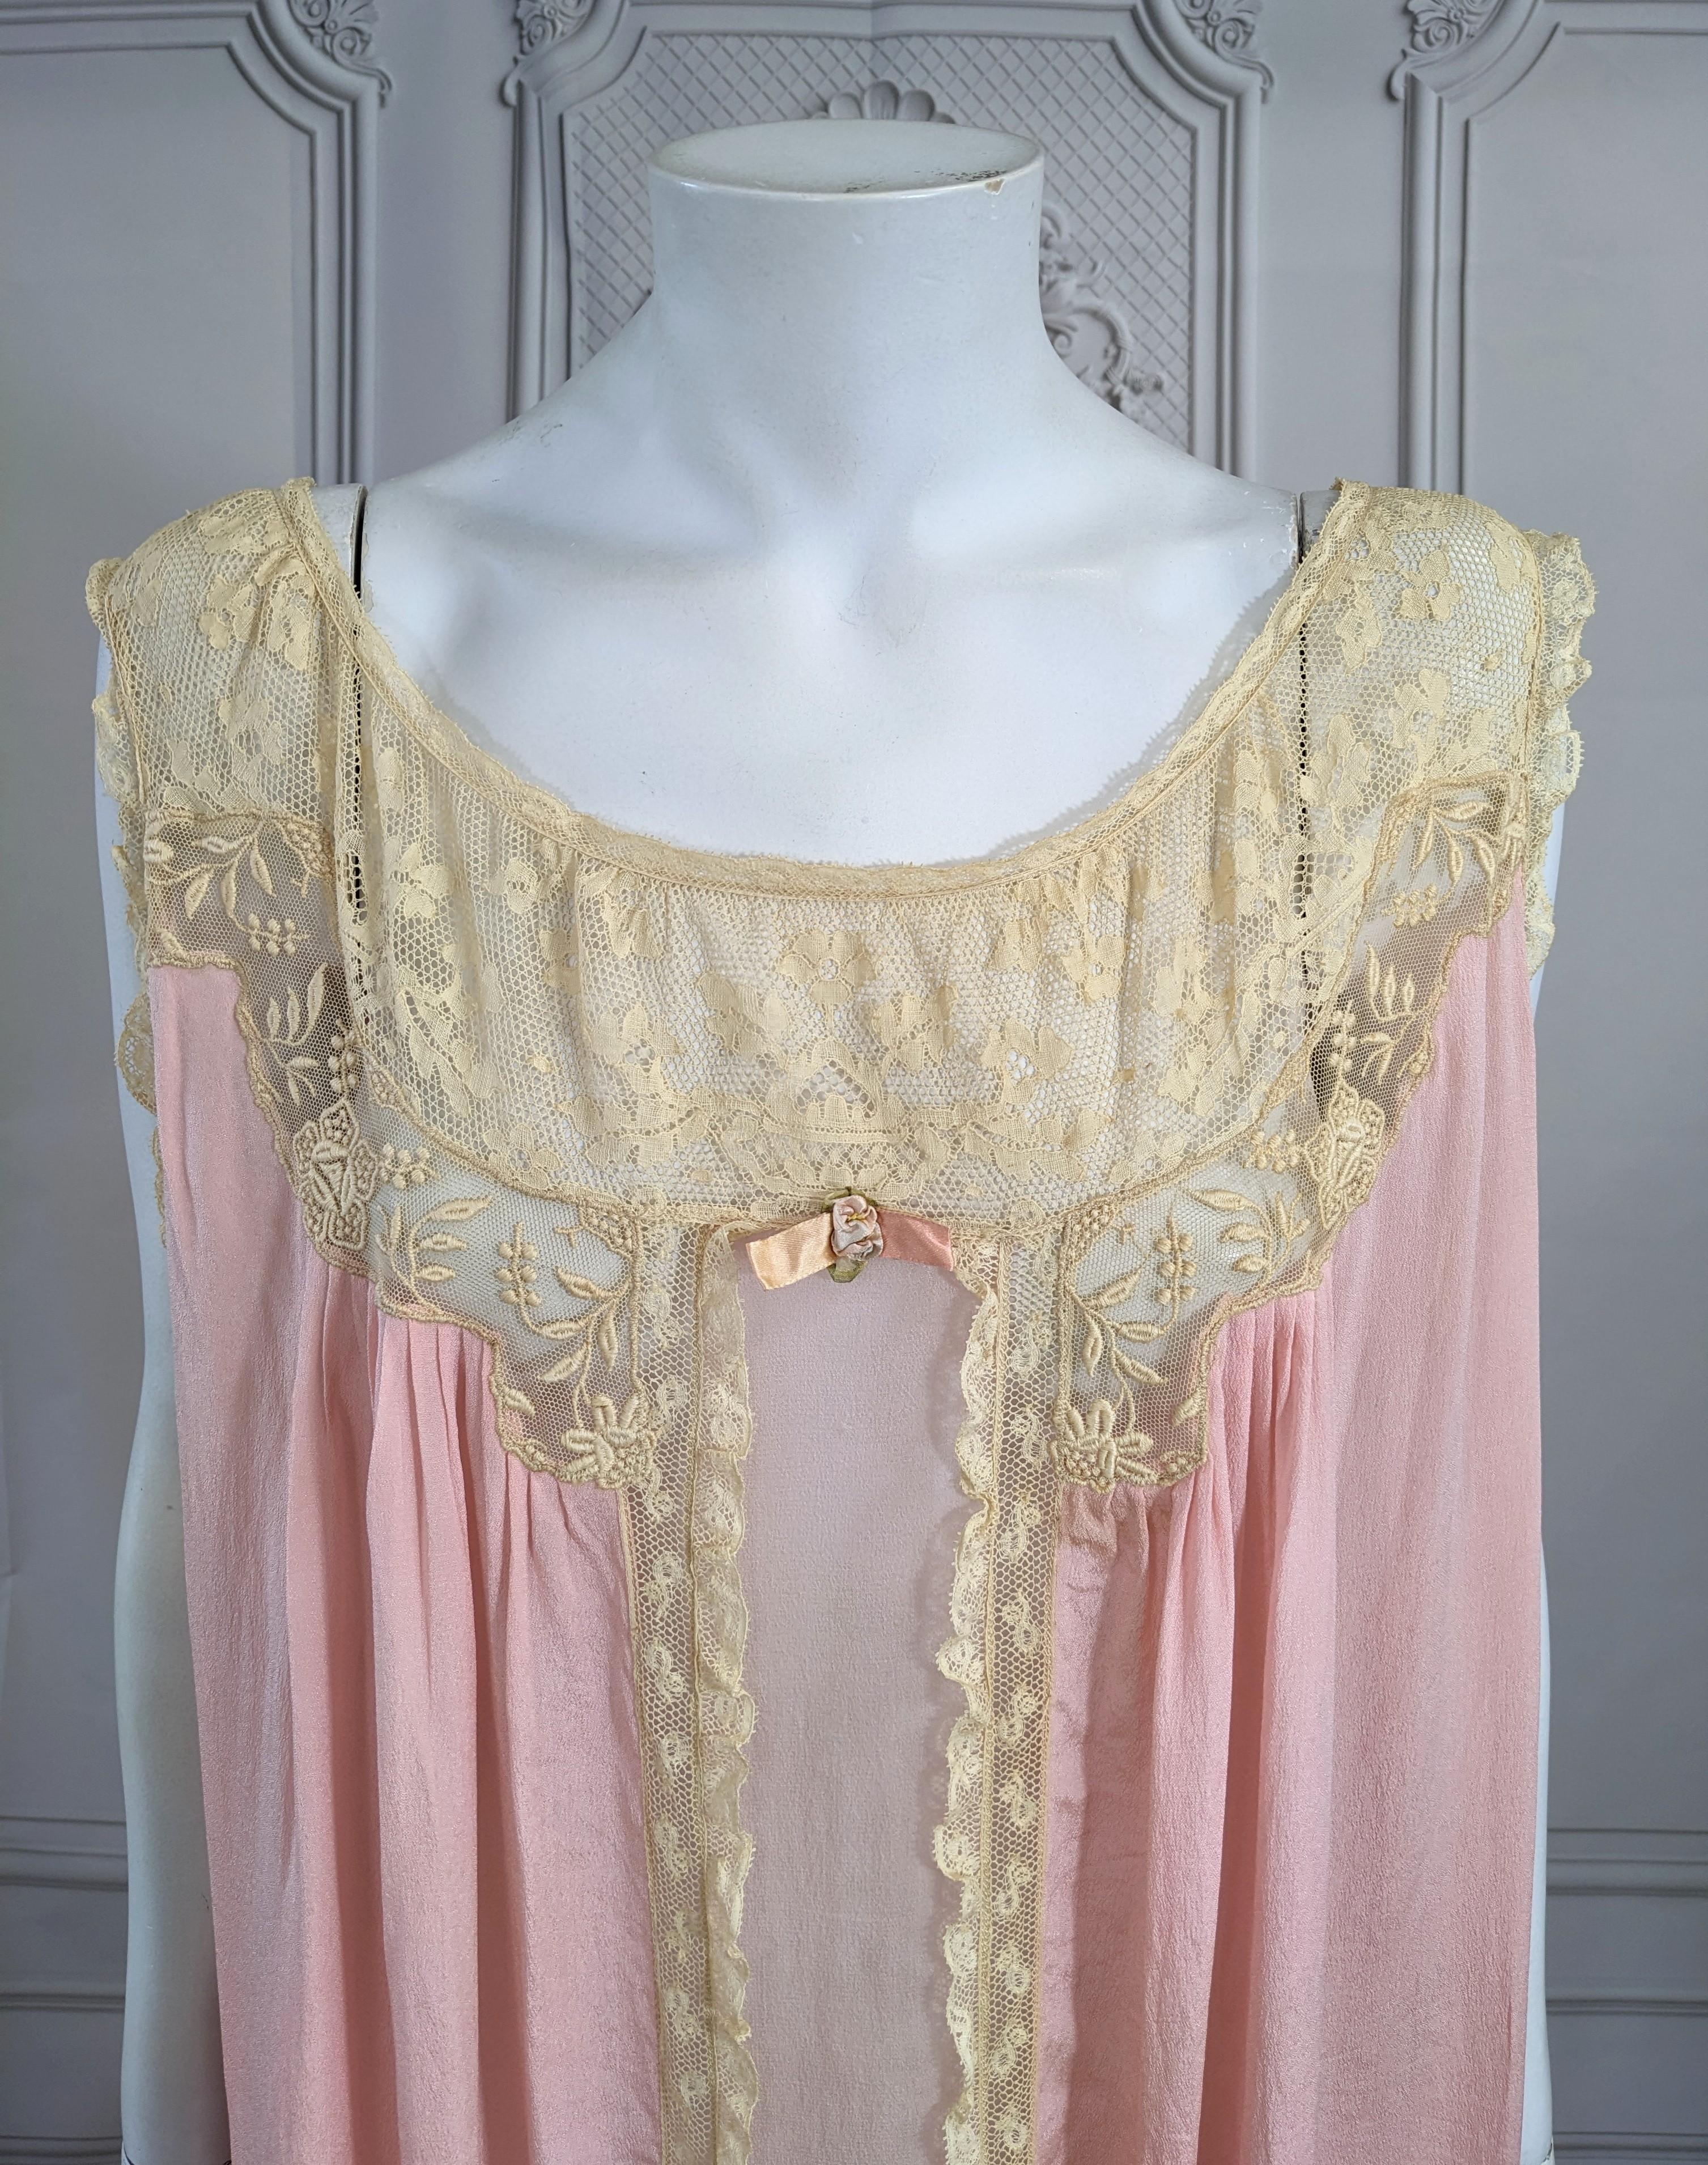 Silk Crepe, Chiffon and Lace Gown, I. Magnin 3